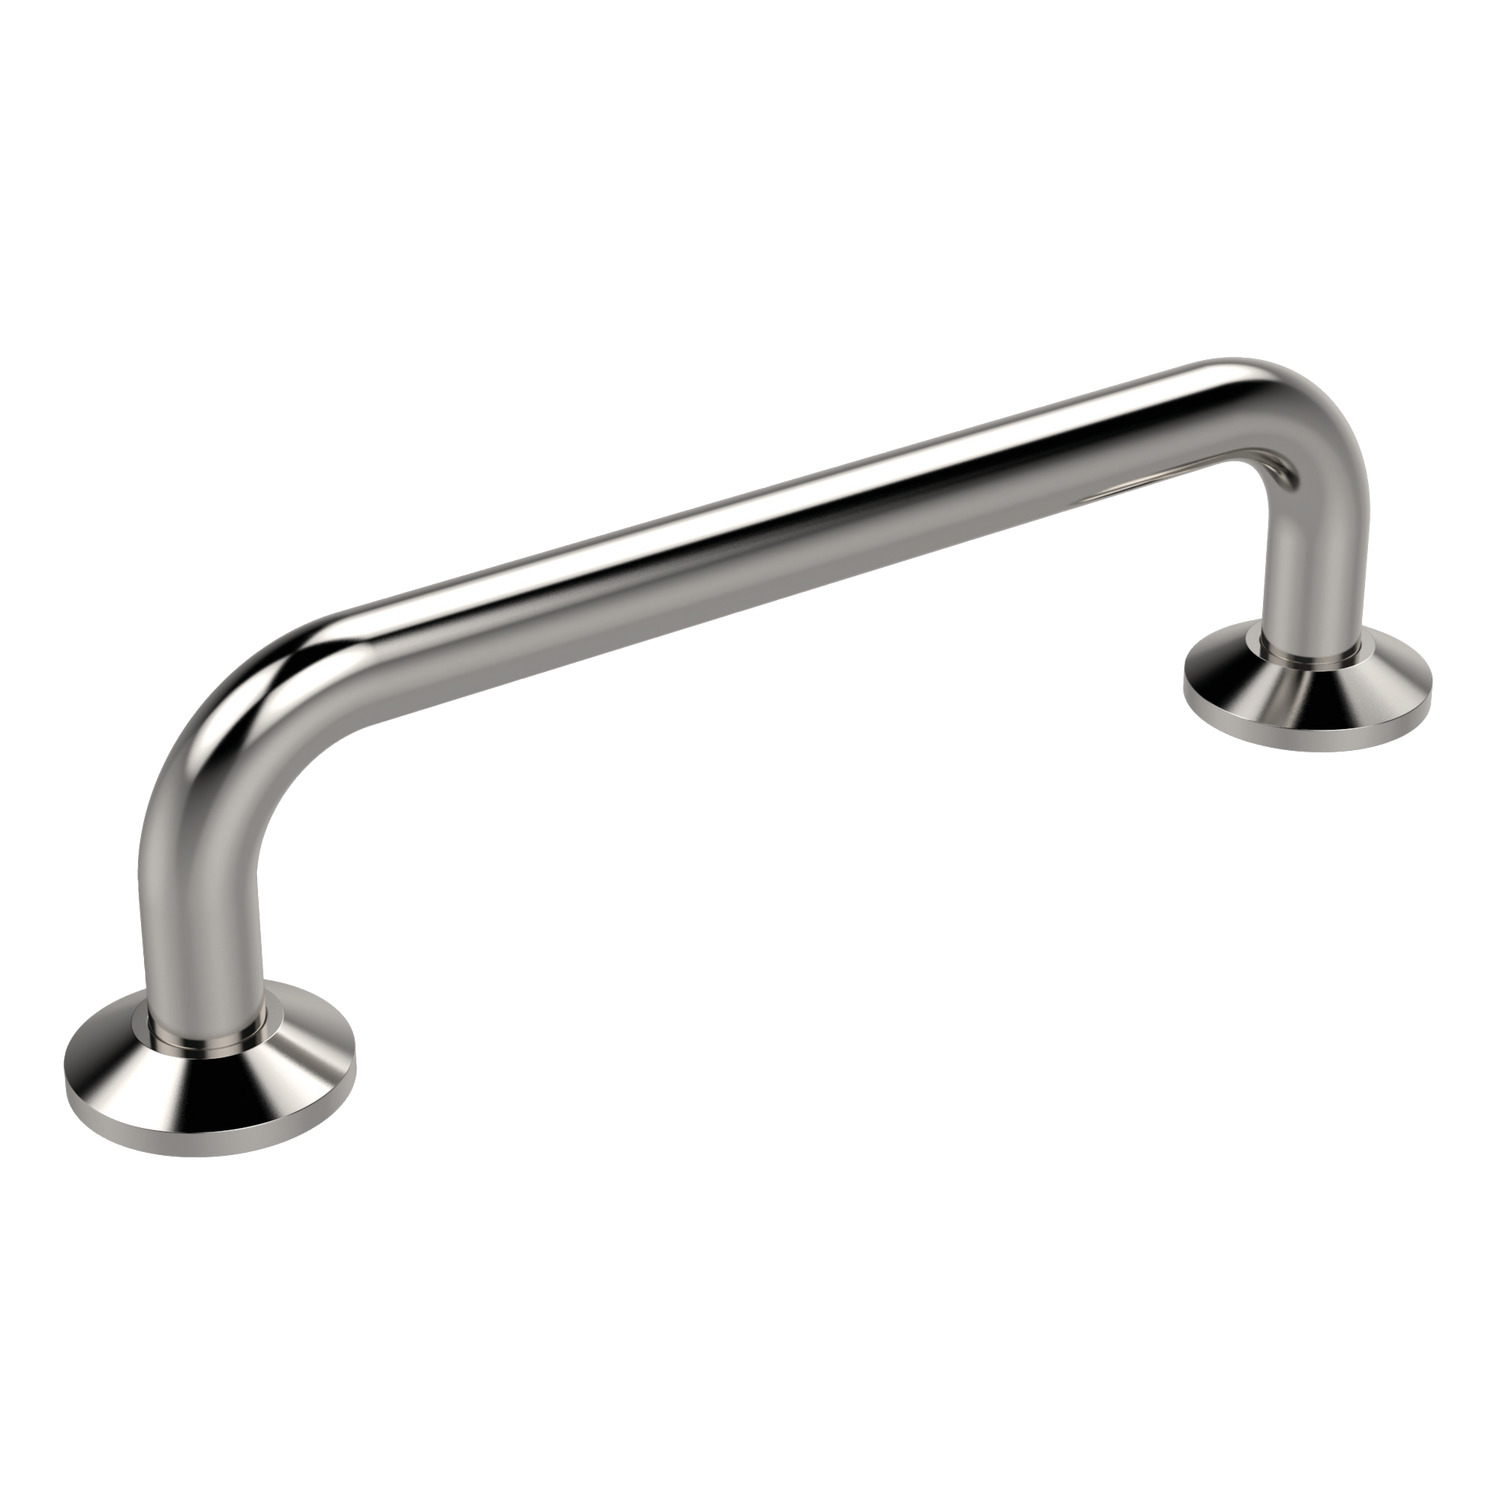 Product 78940, Pull Handles stainless steel / 